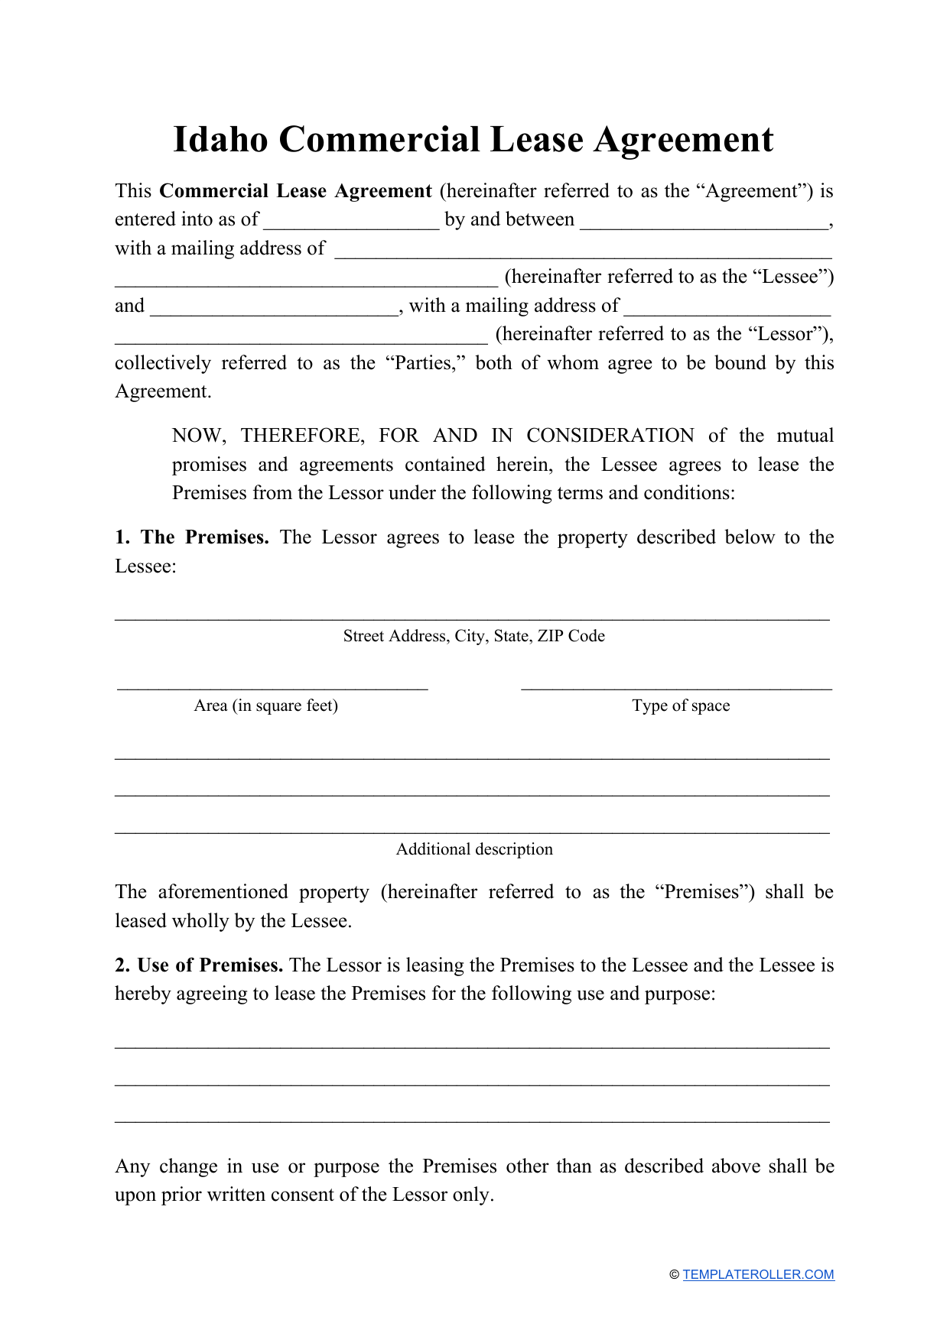 Commercial Lease Agreement Template - Idaho, Page 1